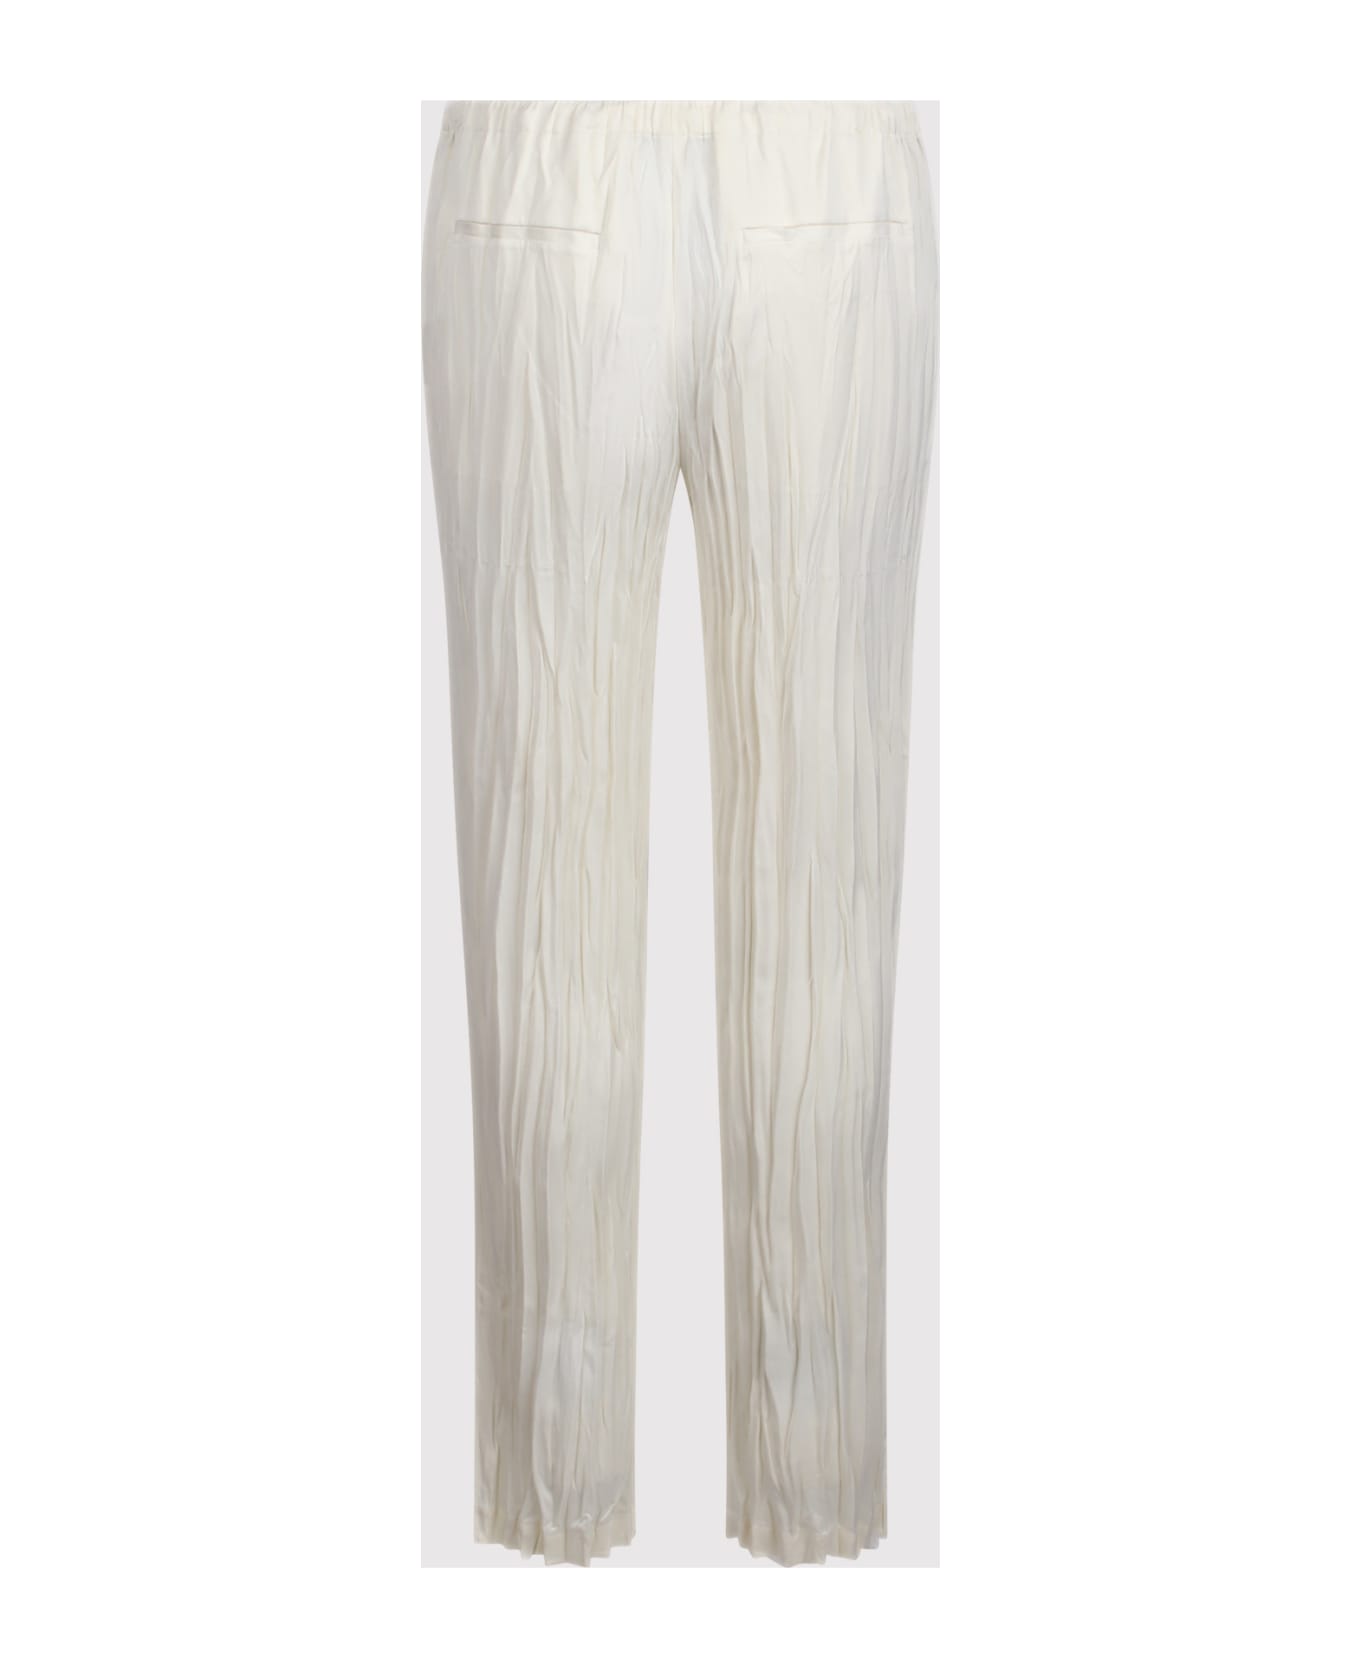 Helmut Lang Trousers With Wrinkled Effect